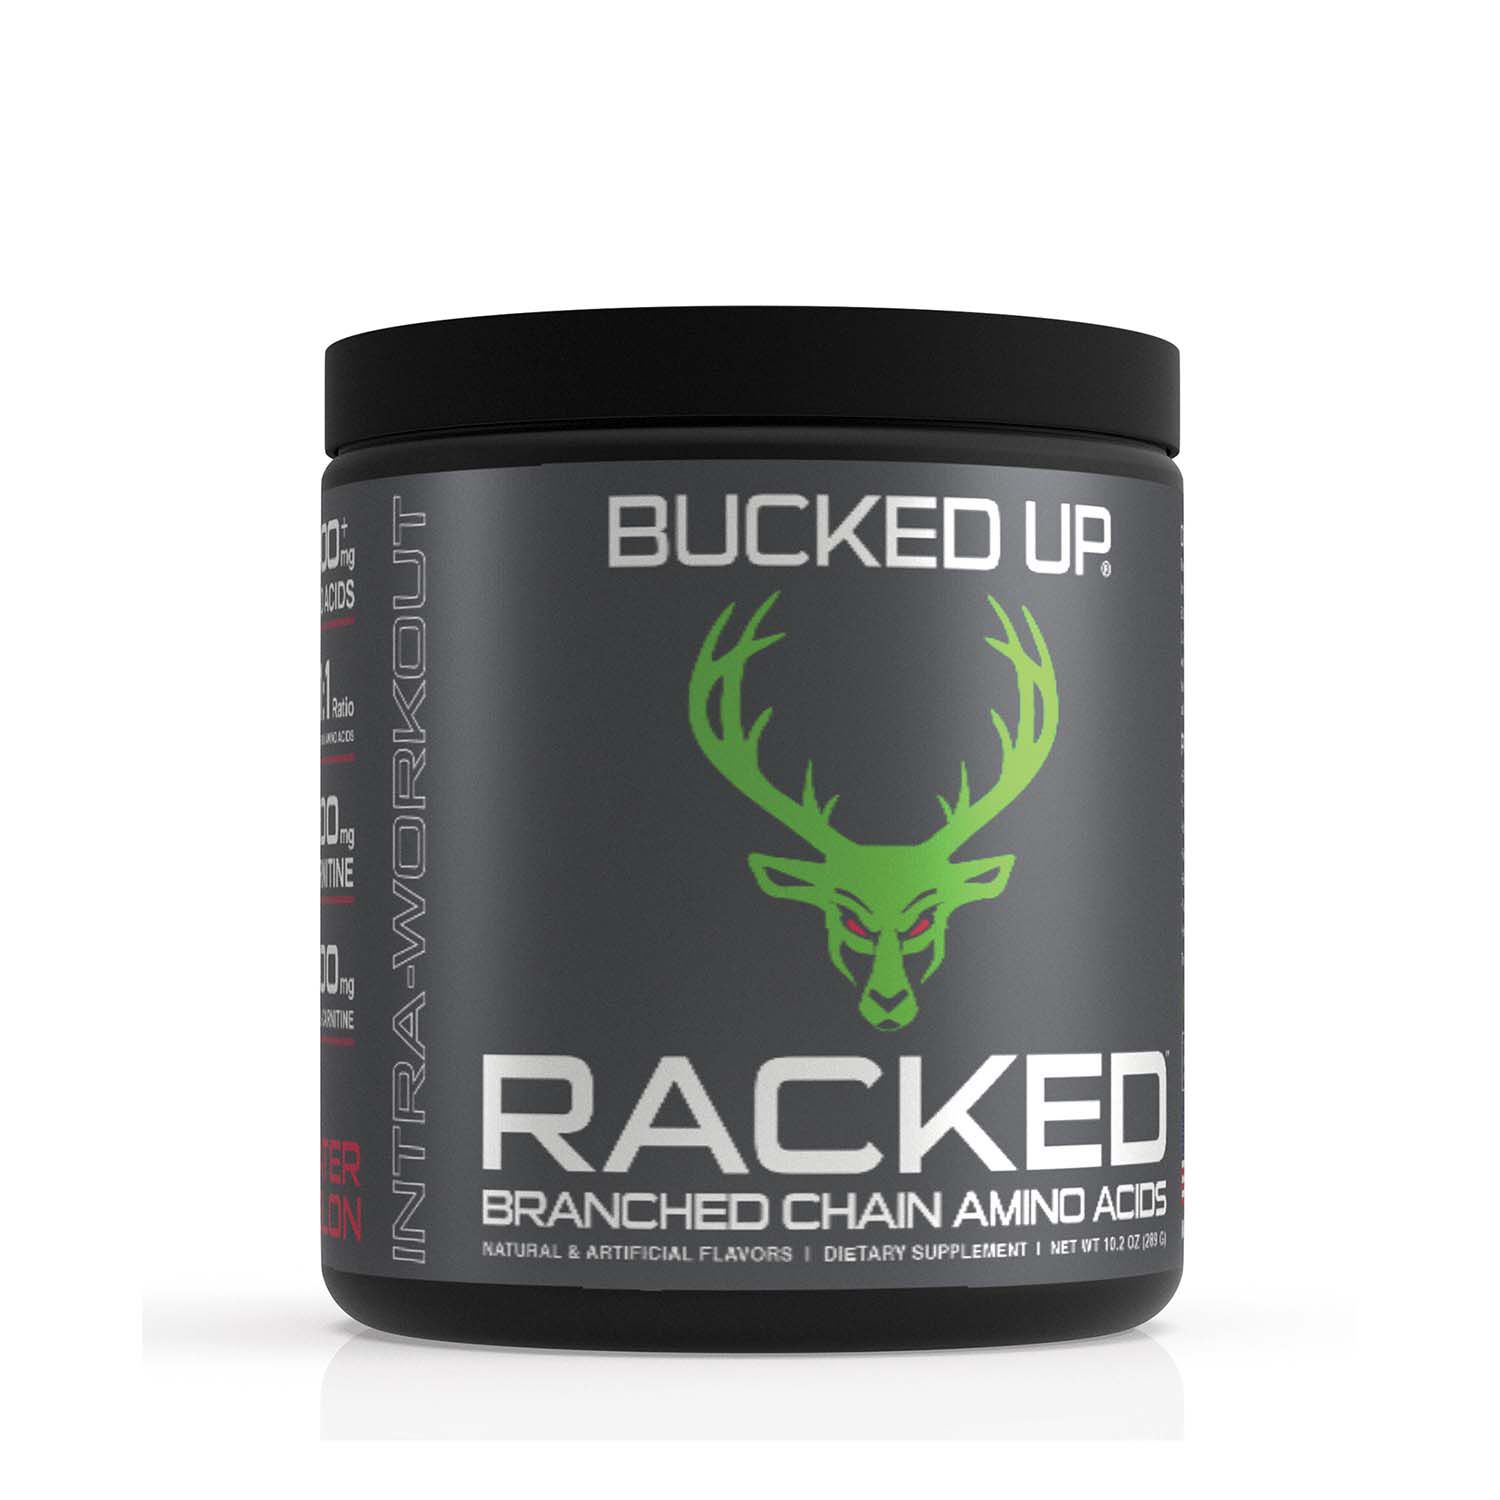 Bucked Up Racked Amino Acids Workout Supplement 9/30/20 Watermelon 